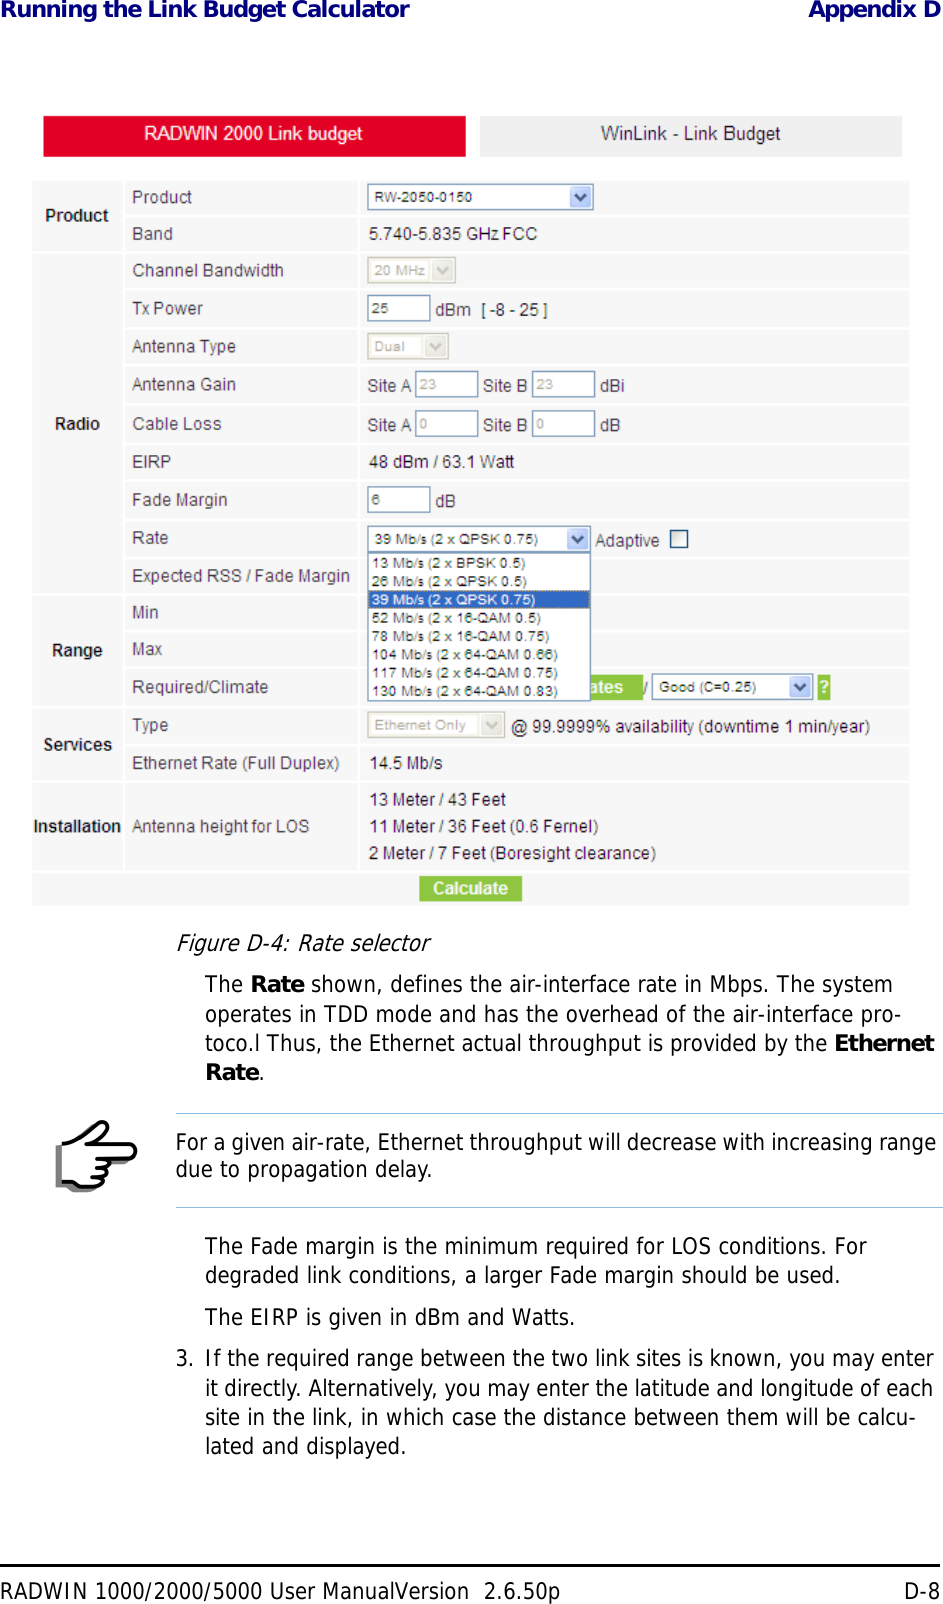 Running the Link Budget Calculator Appendix DRADWIN 1000/2000/5000 User ManualVersion  2.6.50p D-8Figure D-4: Rate selectorThe Rate shown, defines the air-interface rate in Mbps. The system operates in TDD mode and has the overhead of the air-interface pro-toco.l Thus, the Ethernet actual throughput is provided by the Ethernet Rate.The Fade margin is the minimum required for LOS conditions. For degraded link conditions, a larger Fade margin should be used.The EIRP is given in dBm and Watts.3. If the required range between the two link sites is known, you may enter it directly. Alternatively, you may enter the latitude and longitude of each site in the link, in which case the distance between them will be calcu-lated and displayed.NoteFor a given air-rate, Ethernet throughput will decrease with increasing range due to propagation delay.